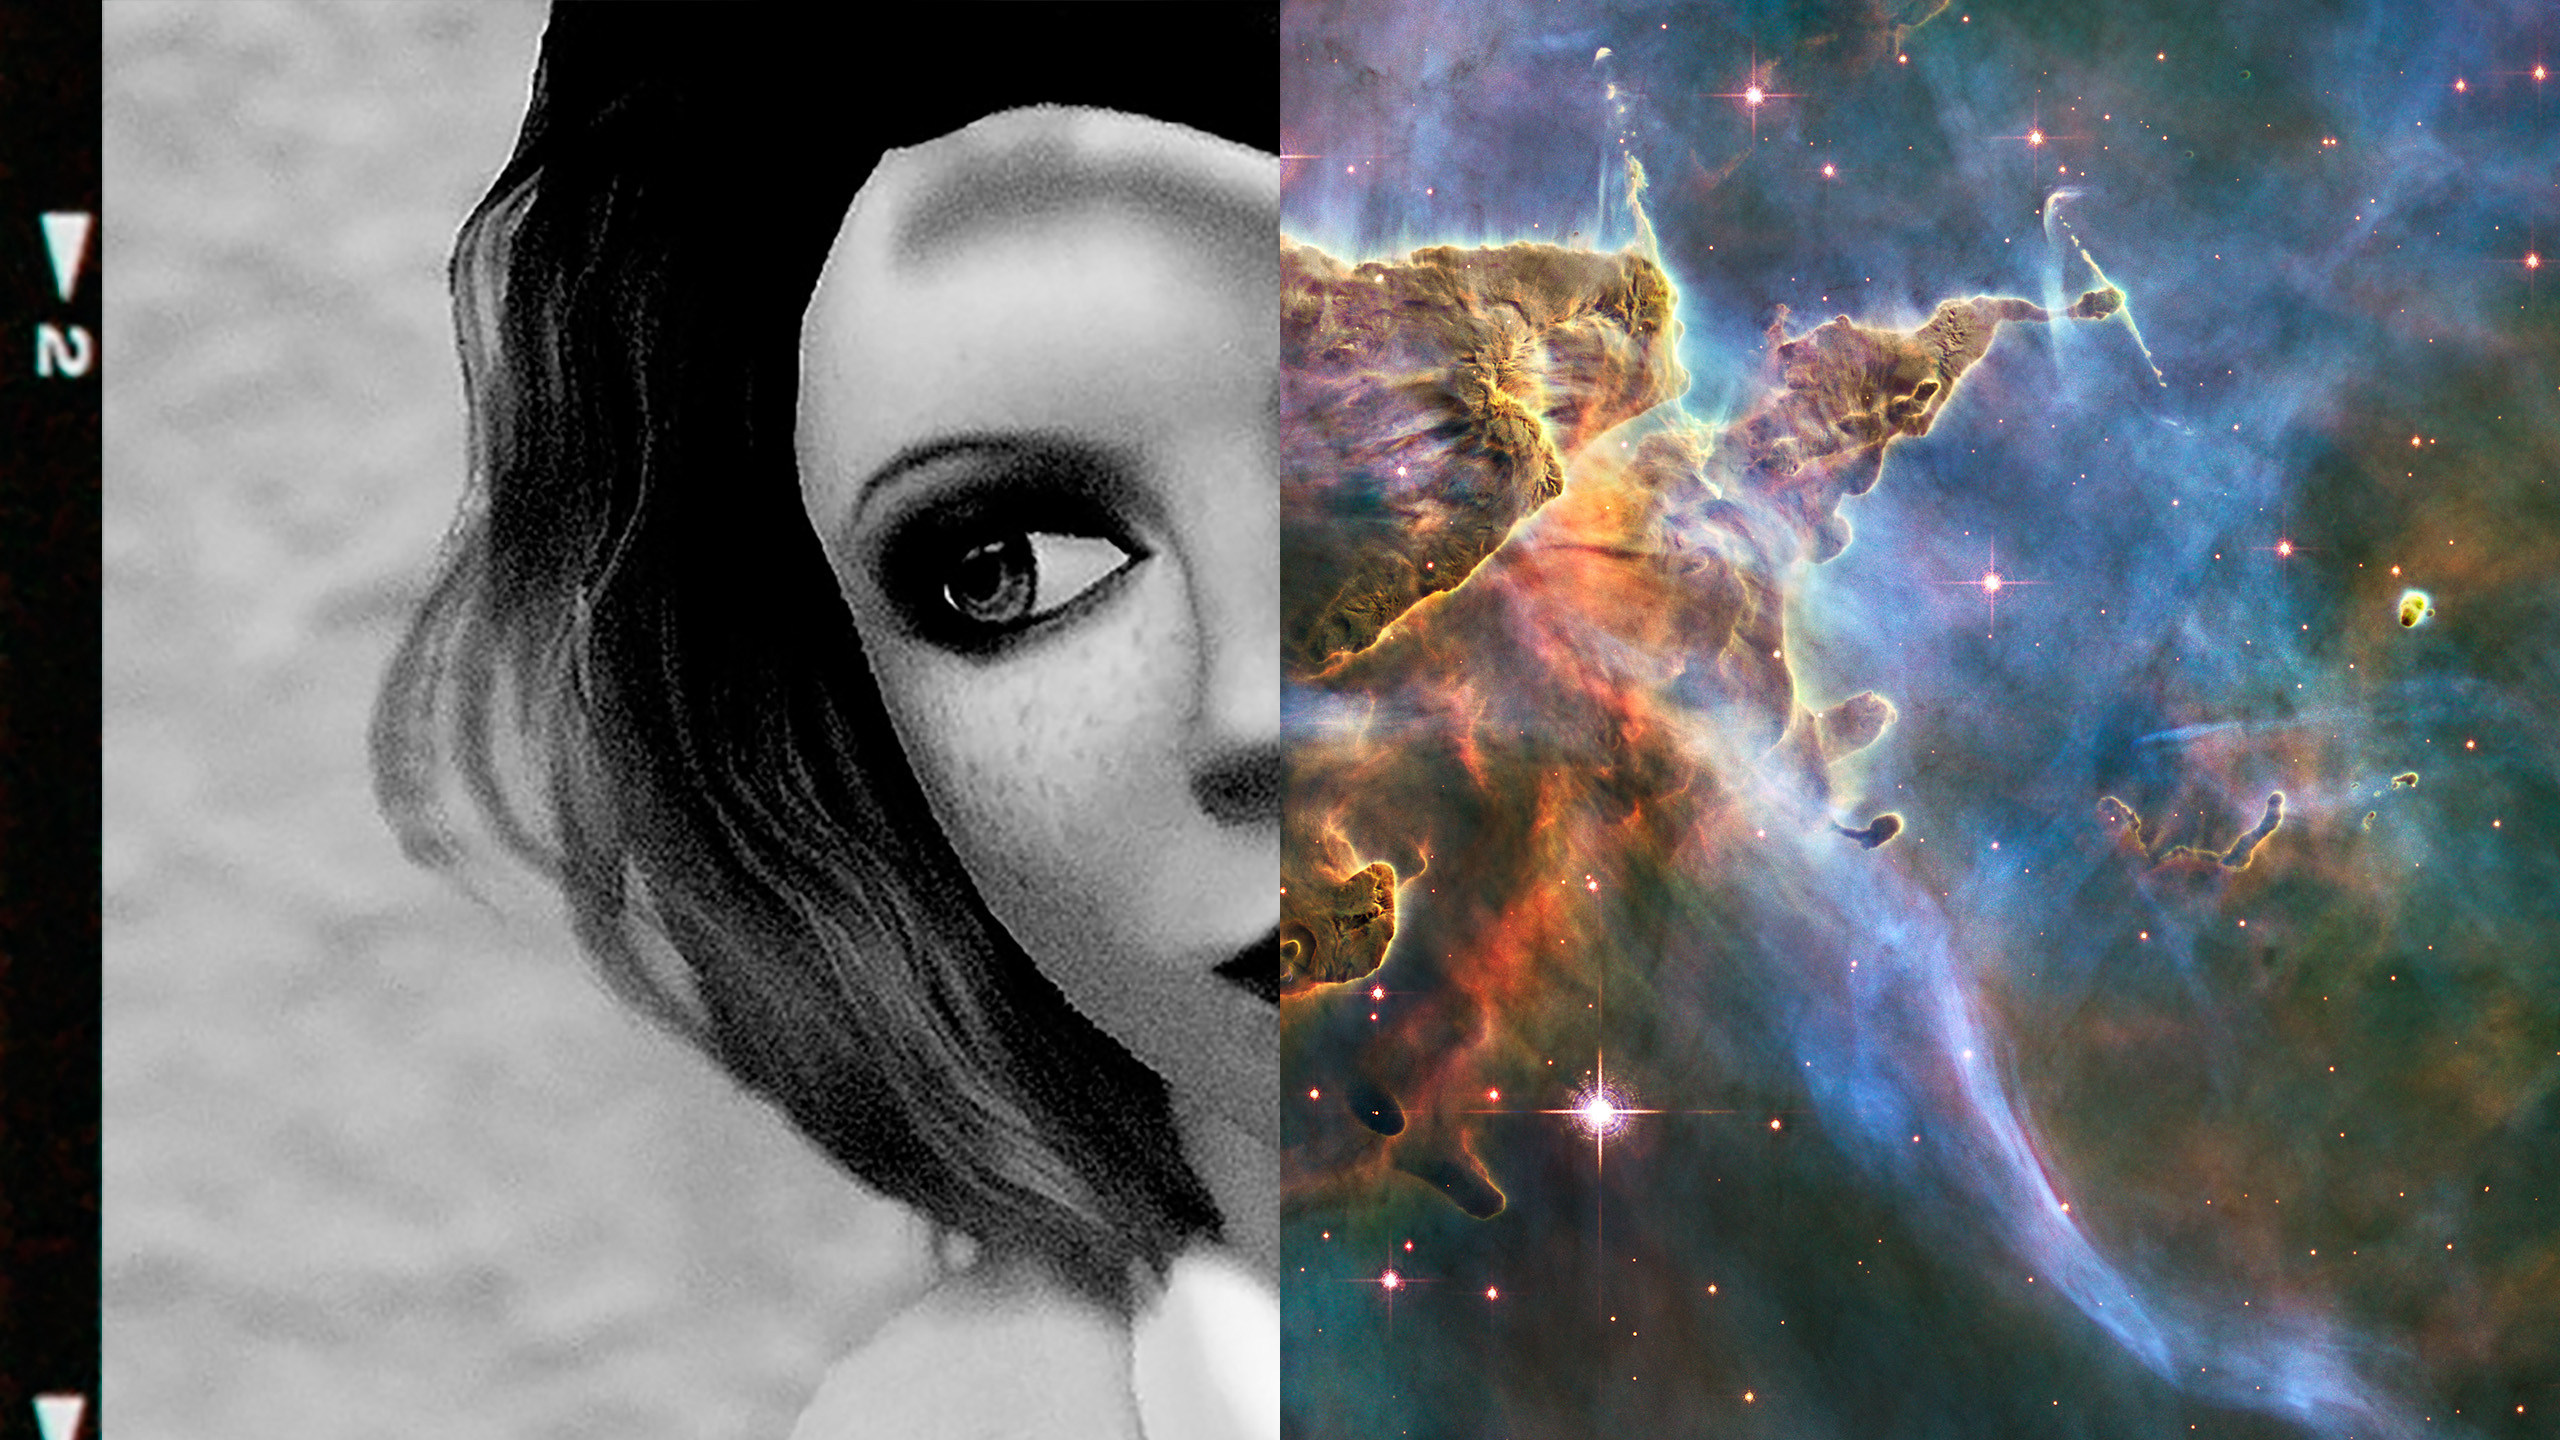 diptych juxtaposing headshot of Vanessa Blaylock and nebula image from the Hubble Space Telescope